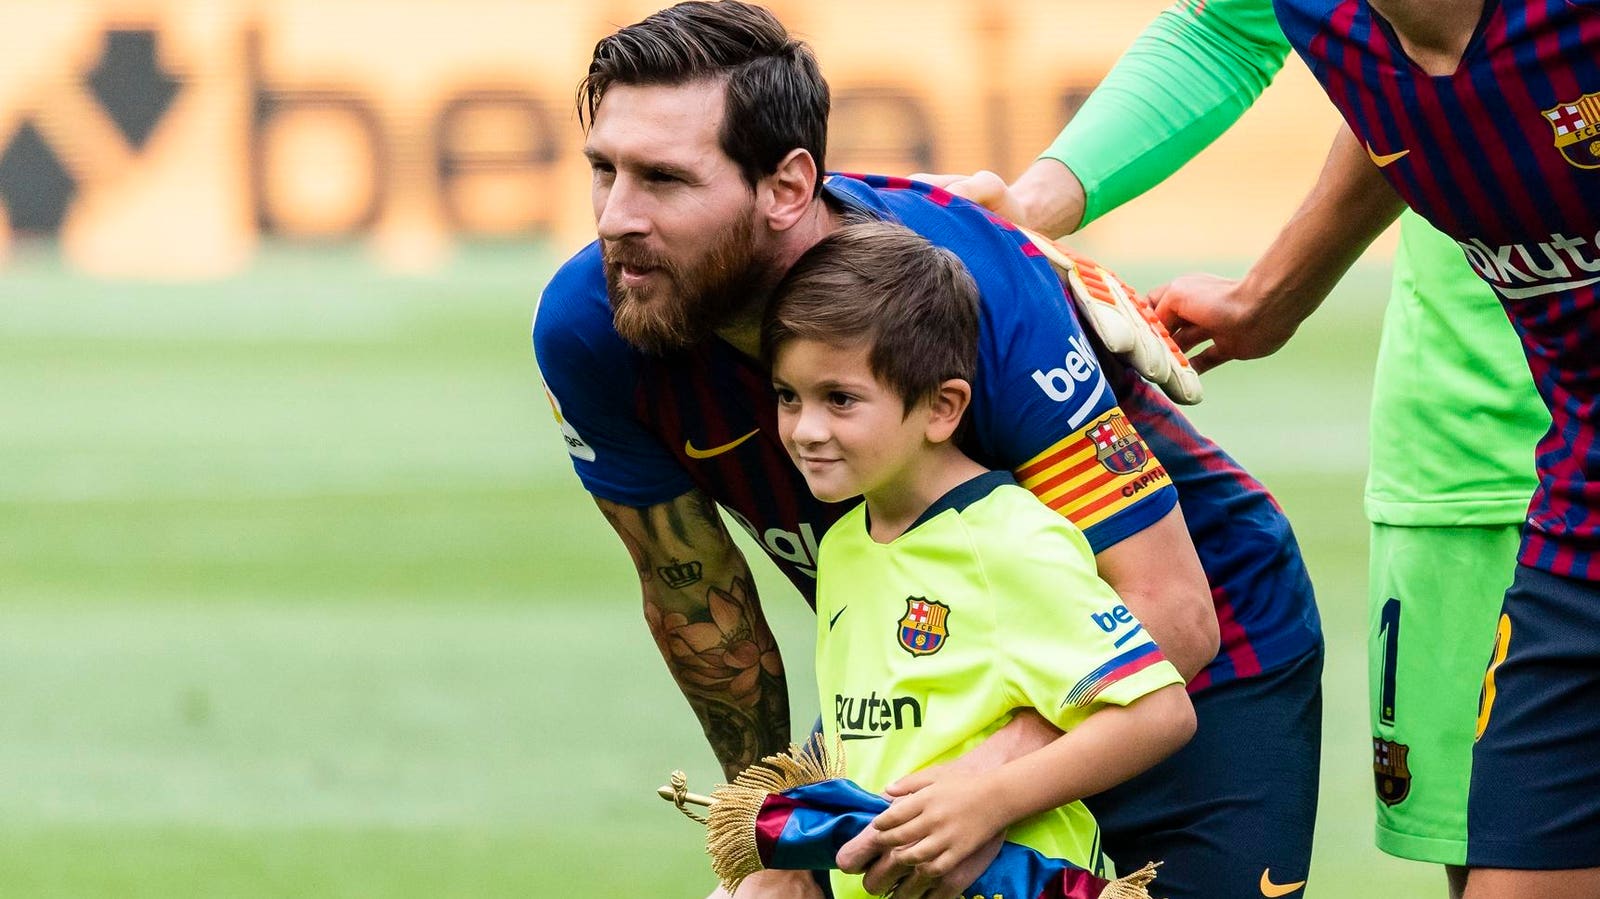 FC Barcelona Icon Lionel Messi’s Son Thiago: ‘I Want To Play With Lamine And For Argentina’